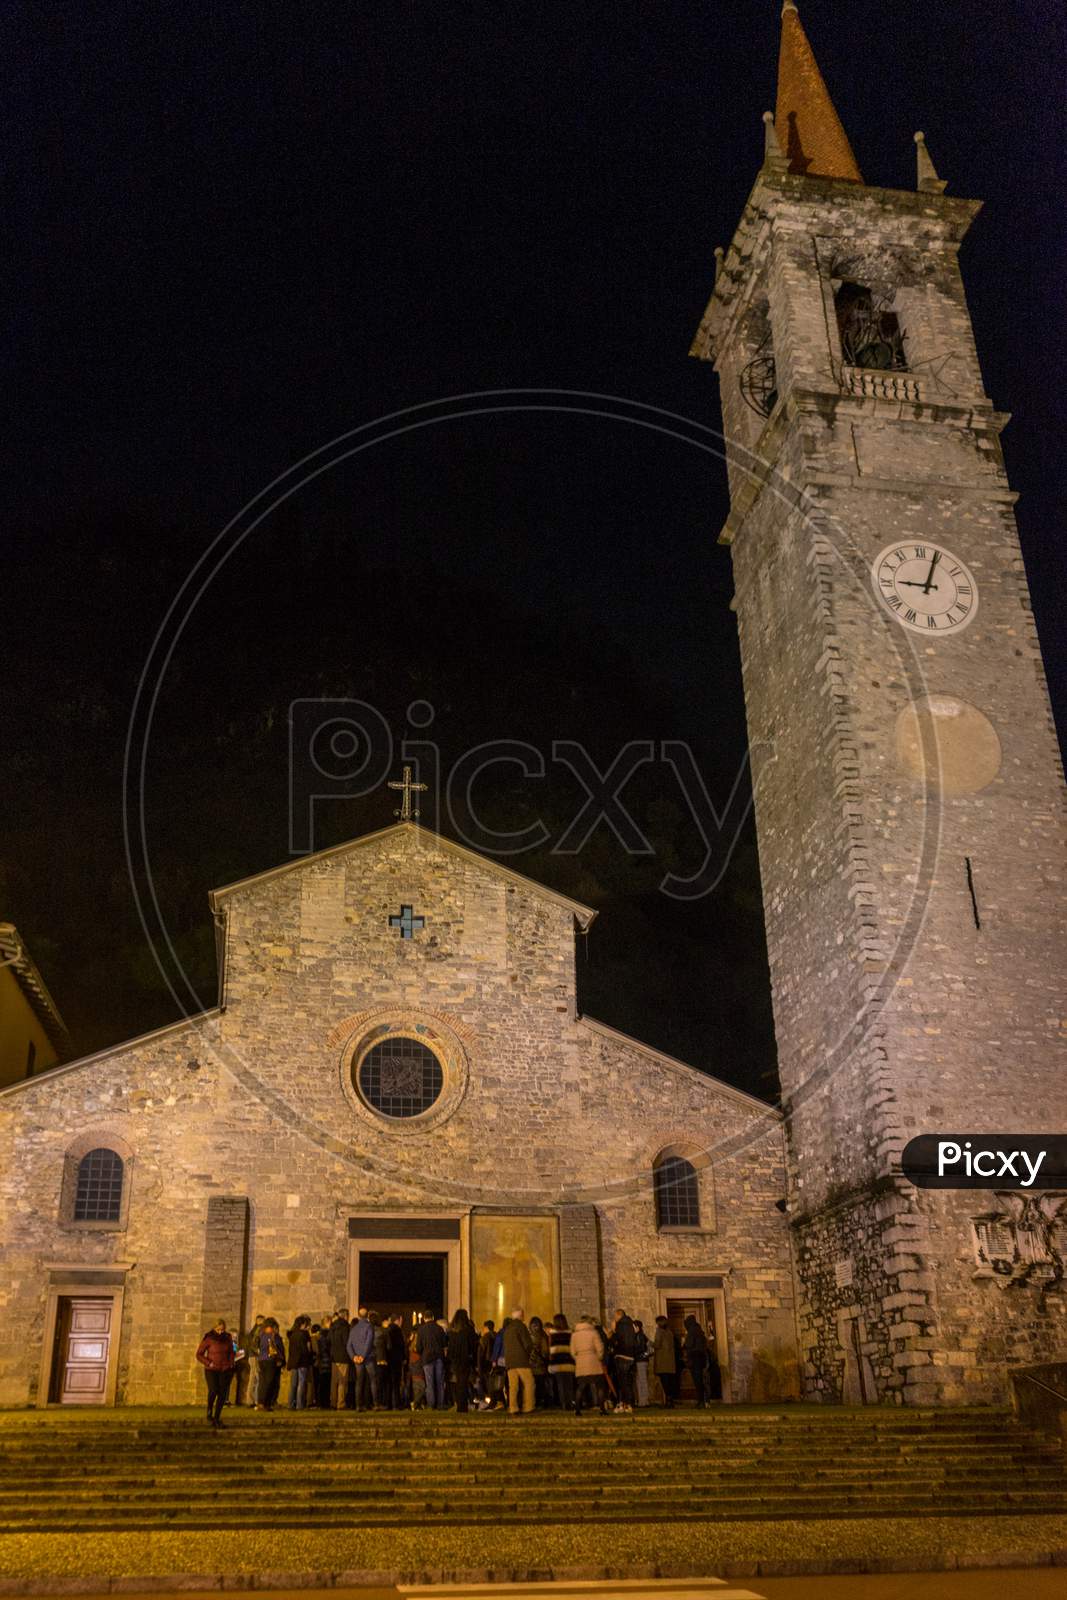 Varenna, Italy - March 31, 2018: The Church Of Saint George In Varenna, Italy At Night